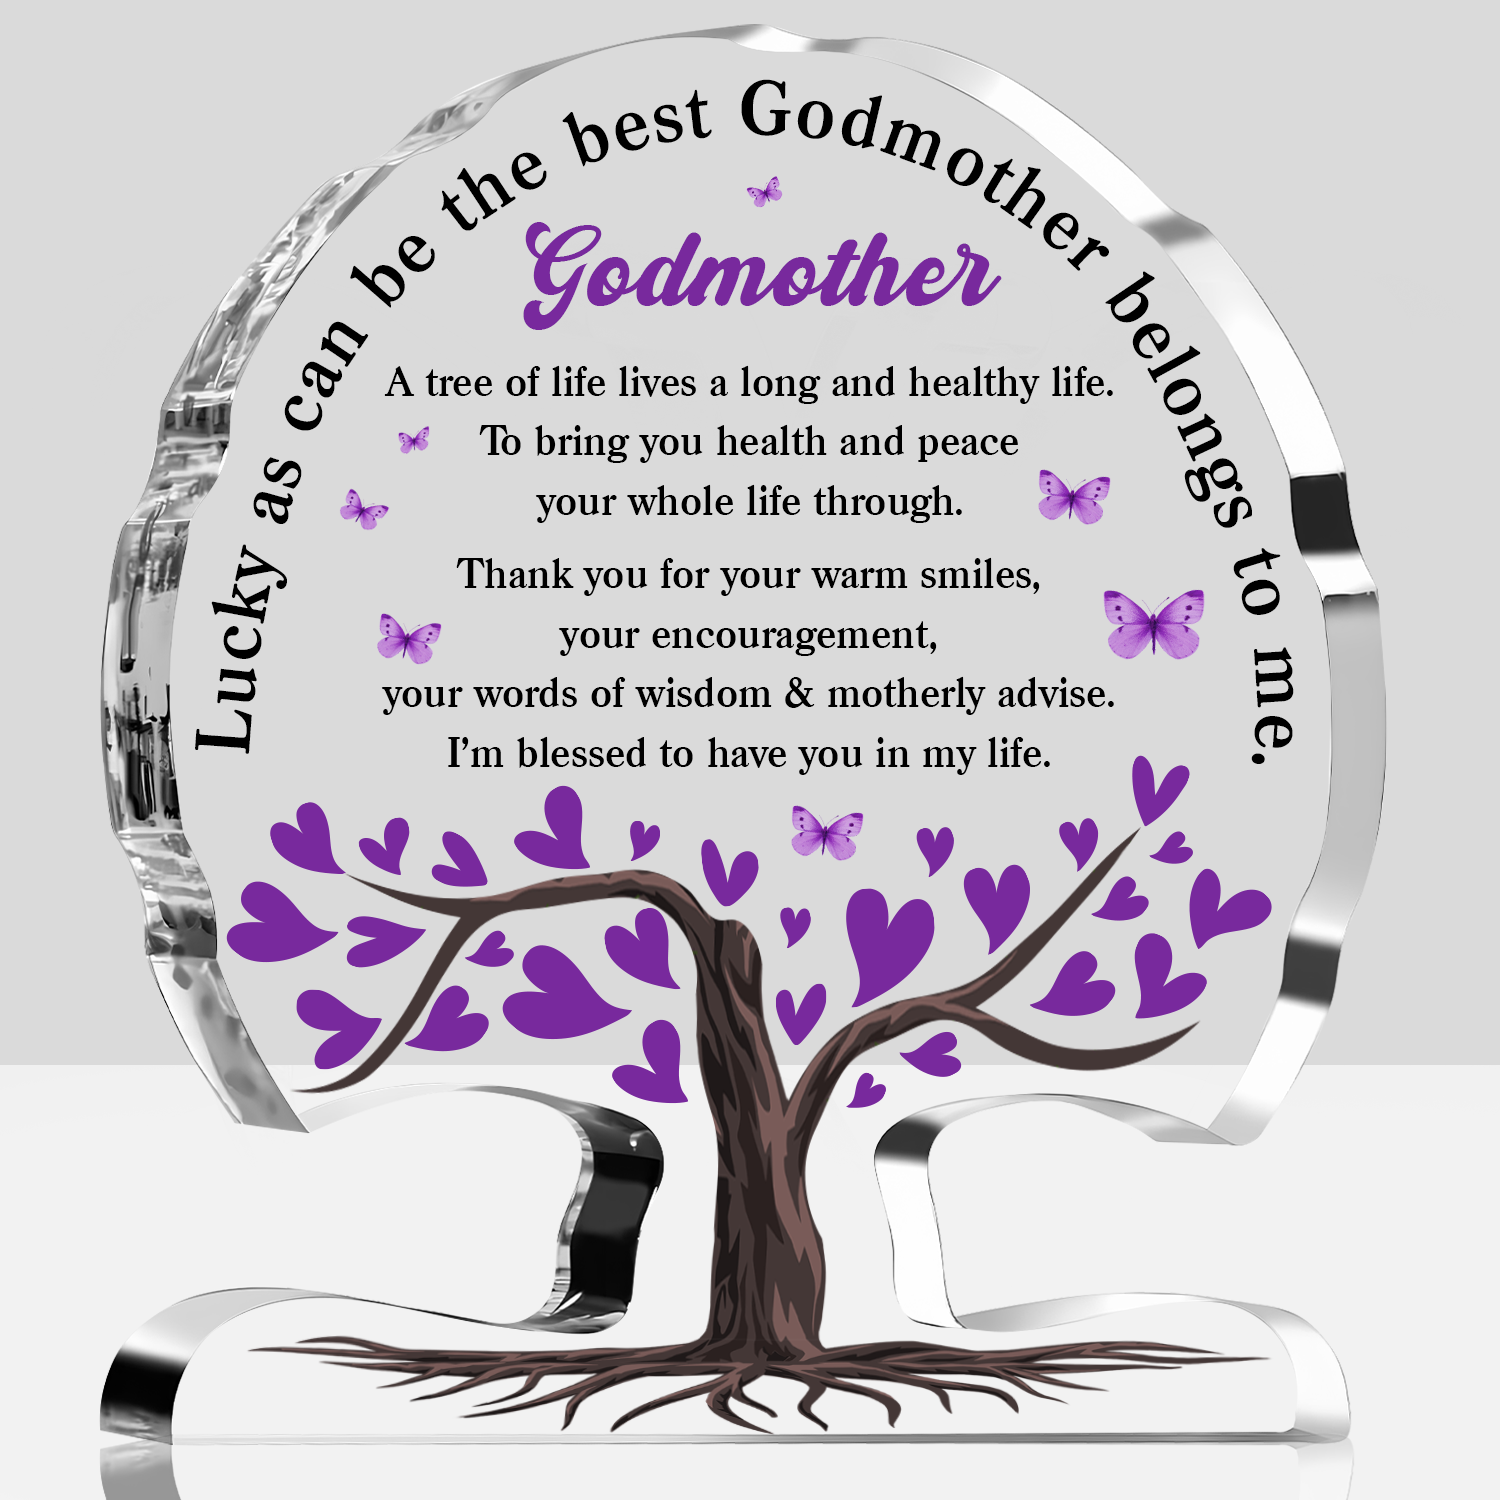 Heart Tree Godmother Acrylic Plaque Christian Gifts